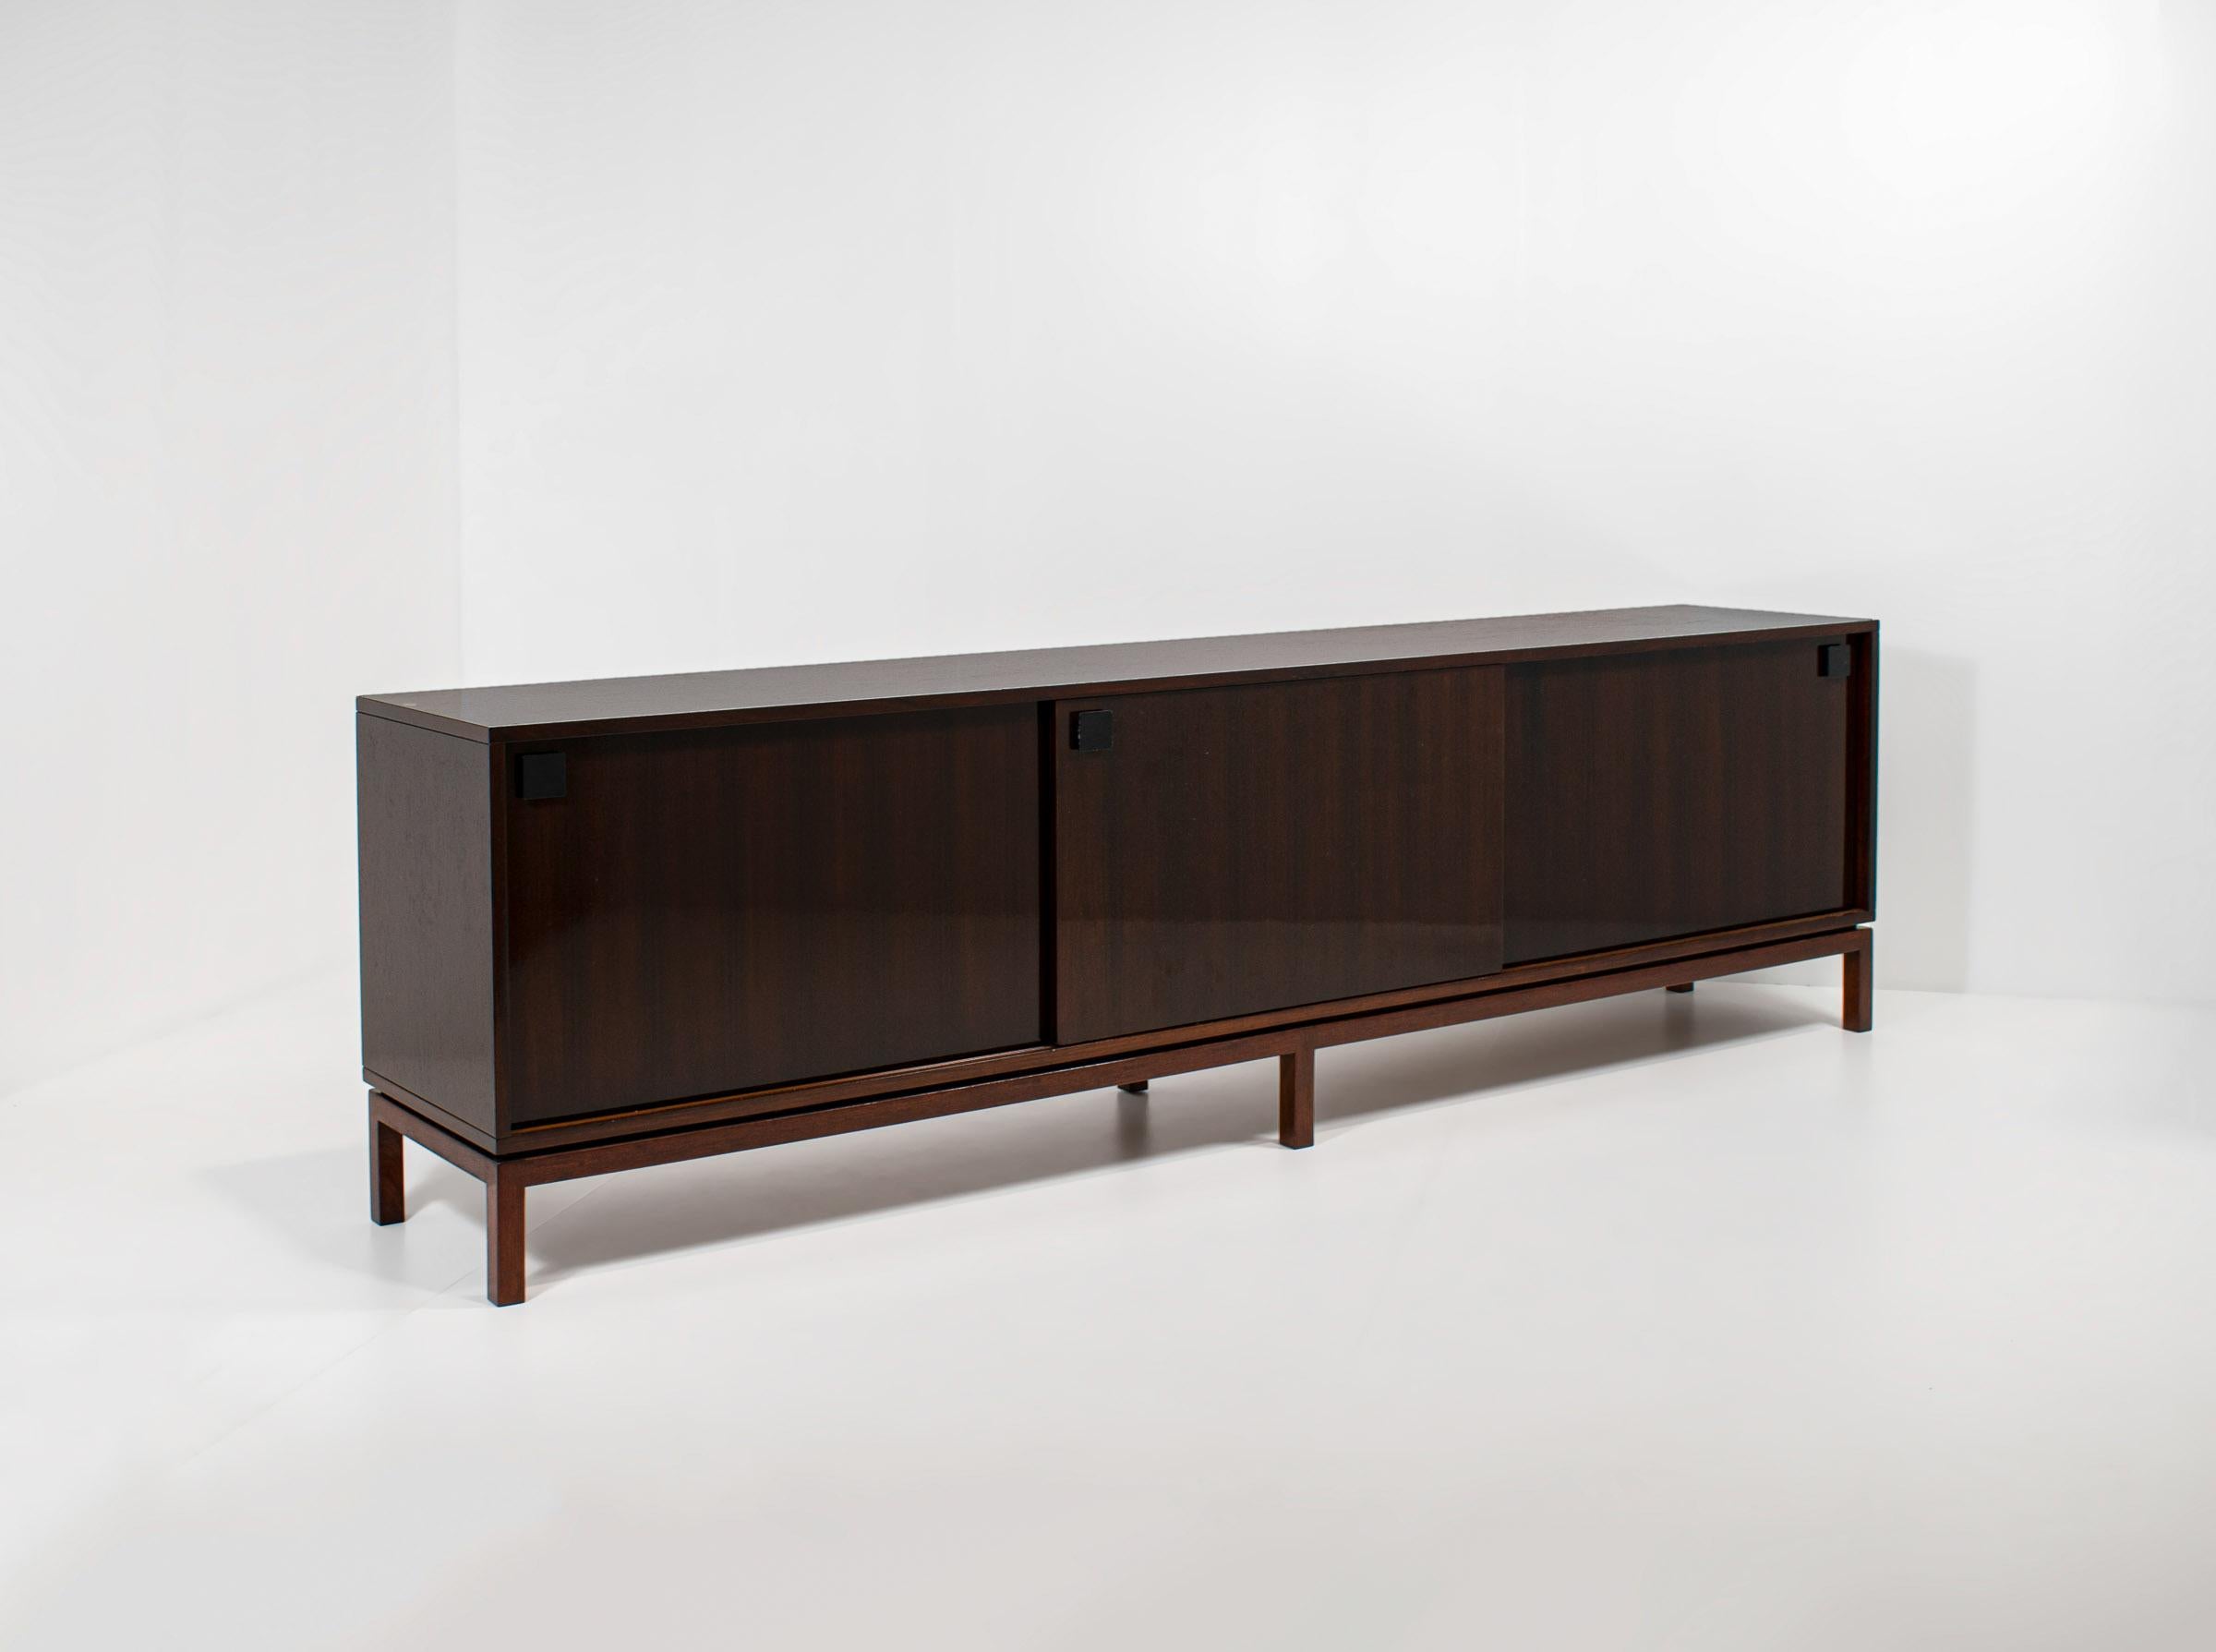 This sideboard has been designed by the Belgian designer Alfred Hendrickx. He was one of the most important post-war designers in the Benelux. His style was minimalistic, but he always kept the bar very high when it came to quality.

This specific